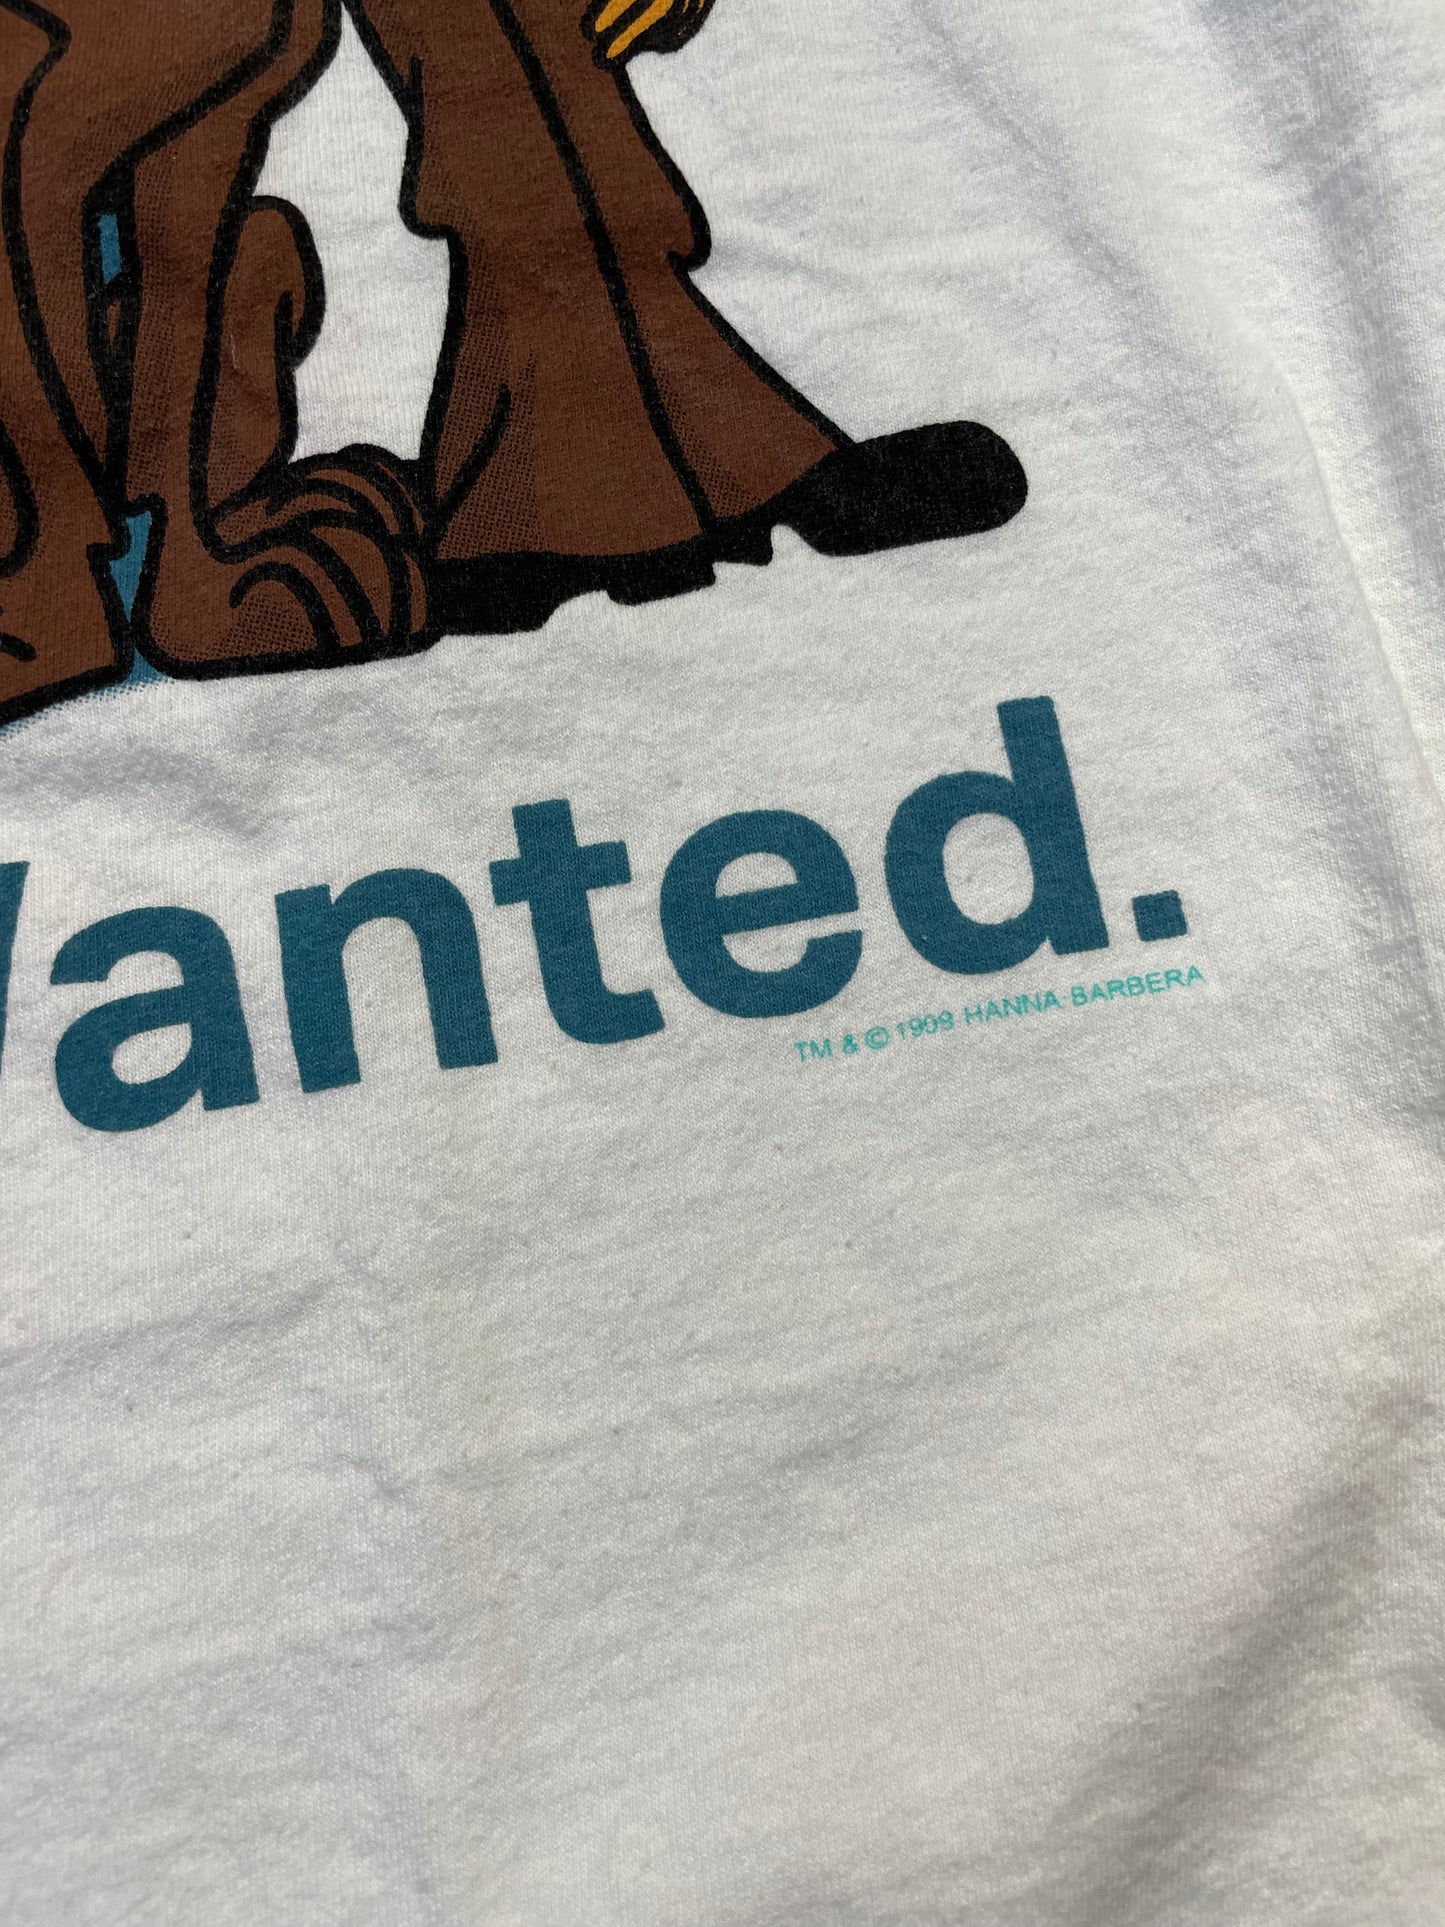 Mysteries Wanted Scooby Doo Tee (X-Large), Tee - Vintage64.com